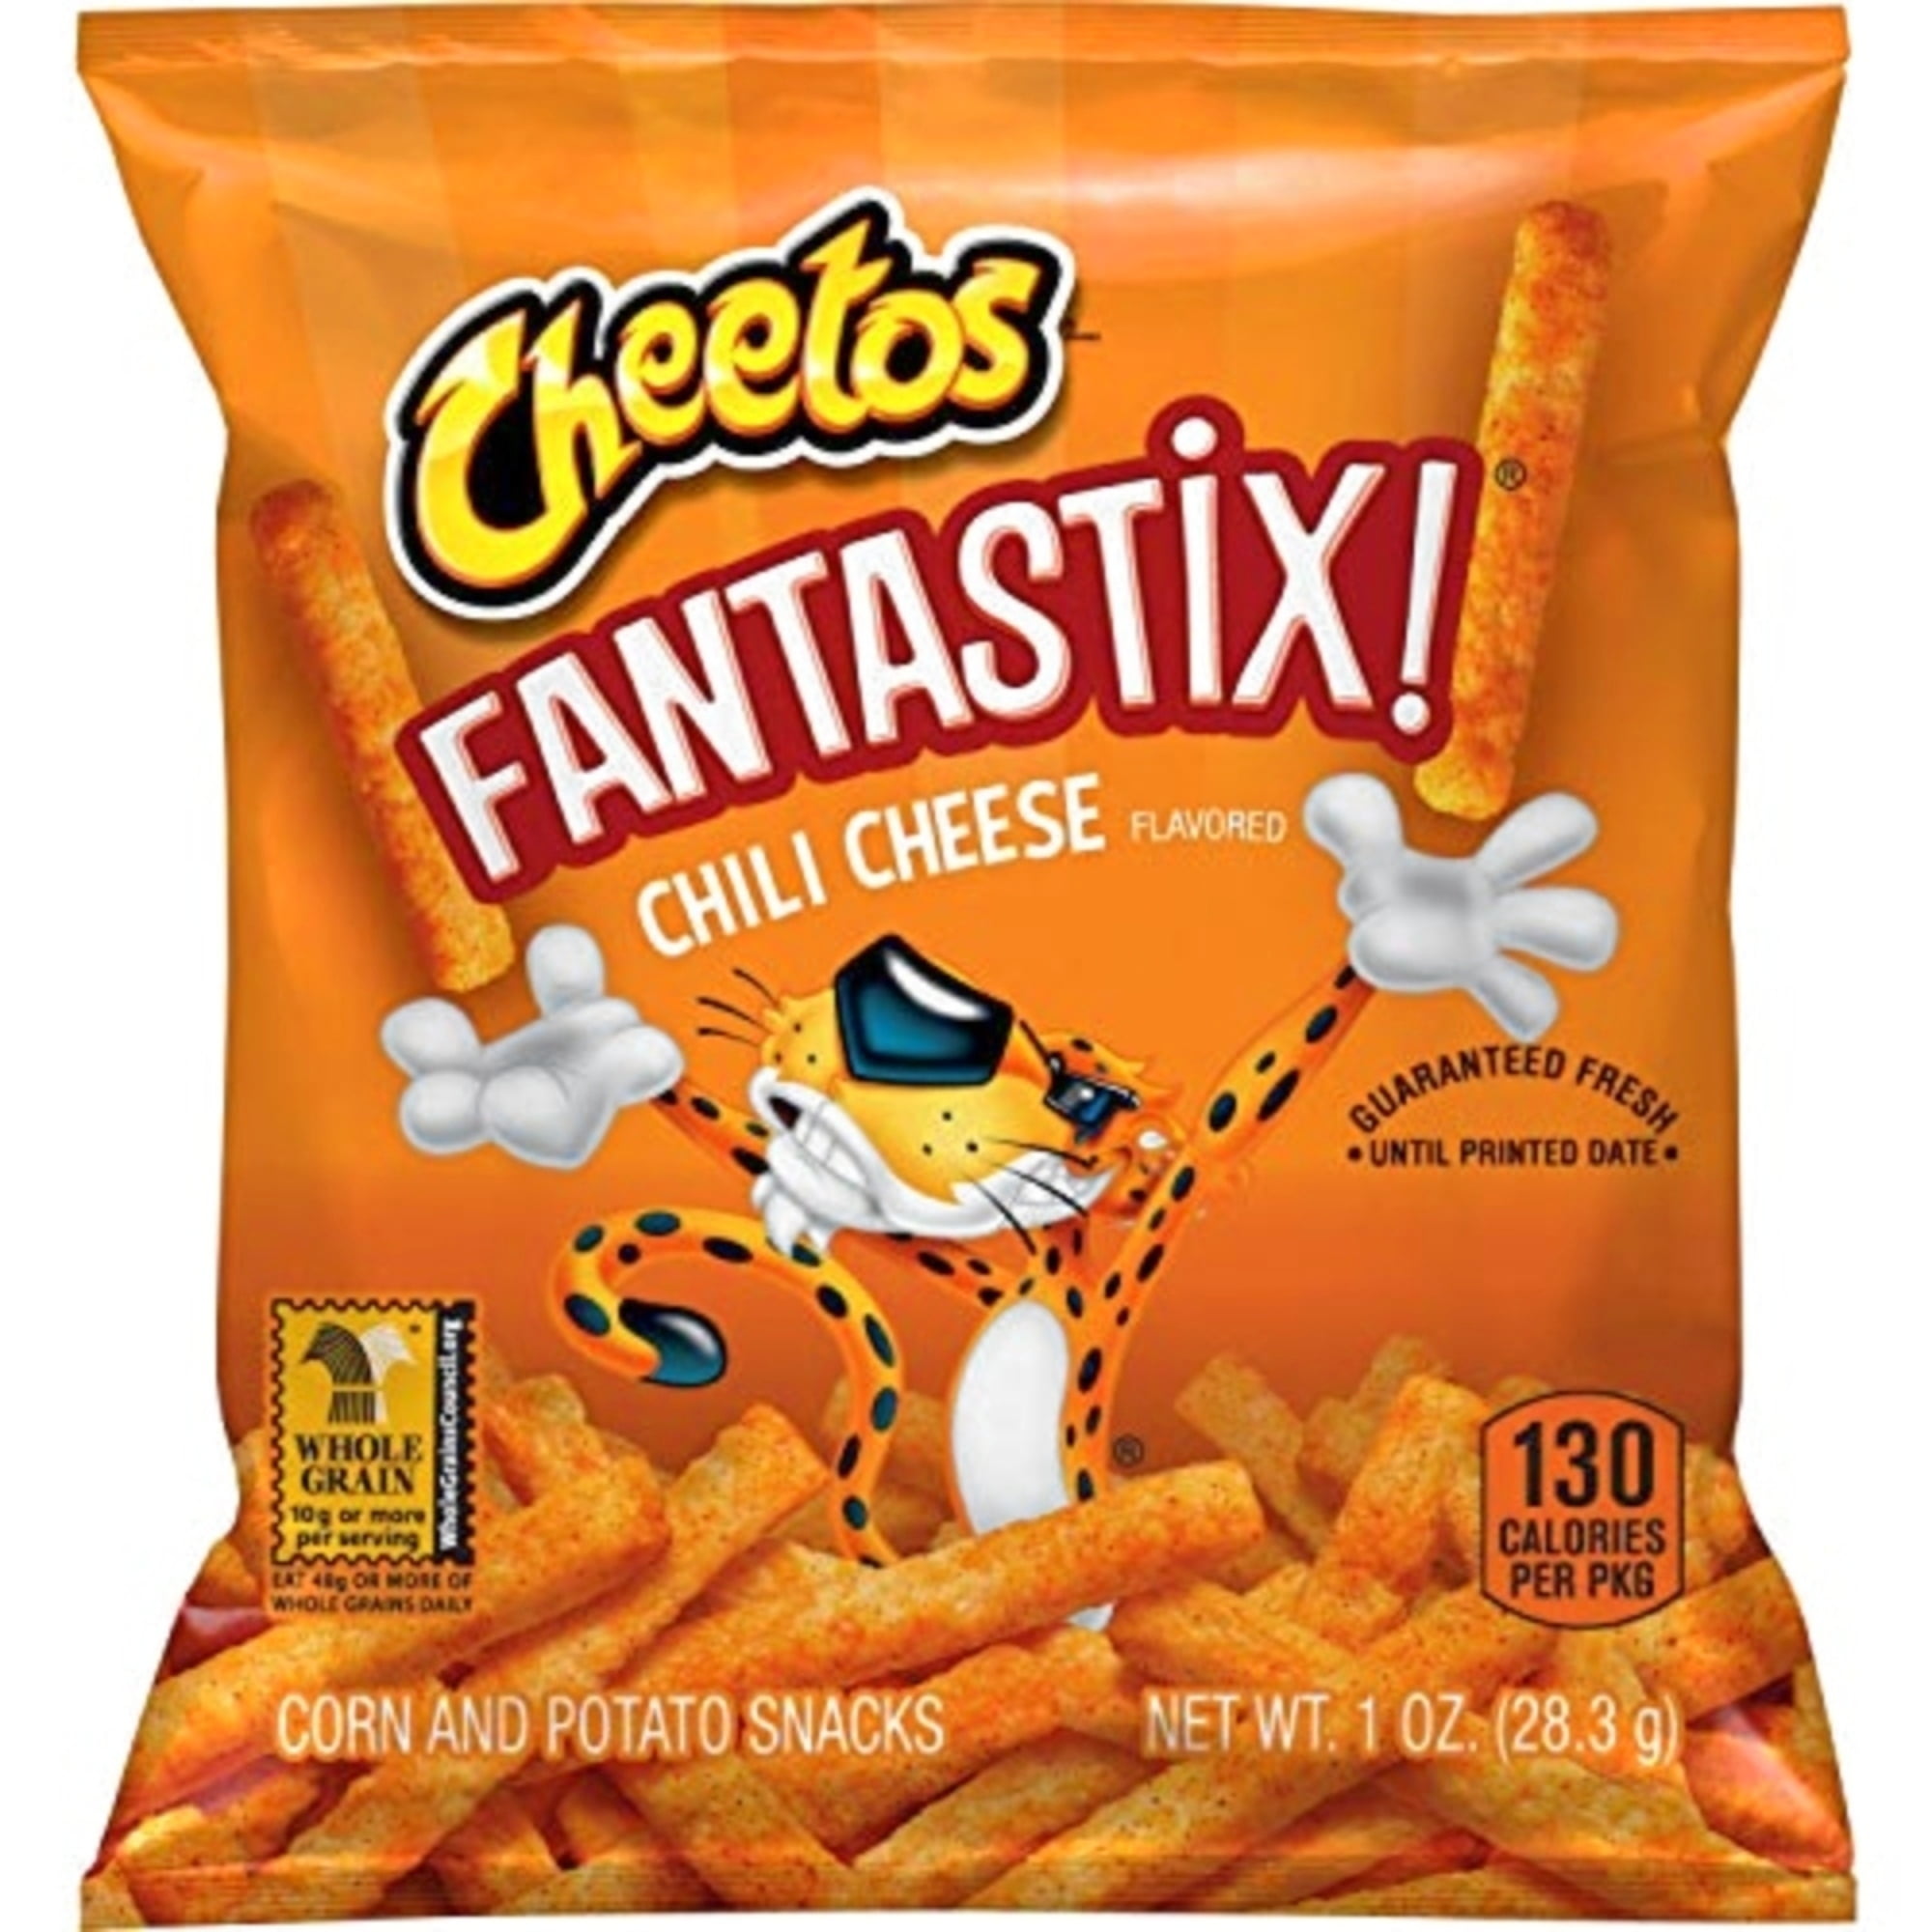 Flamin' Hot Cheese Fantastix Value Pack by Tribeca Curations